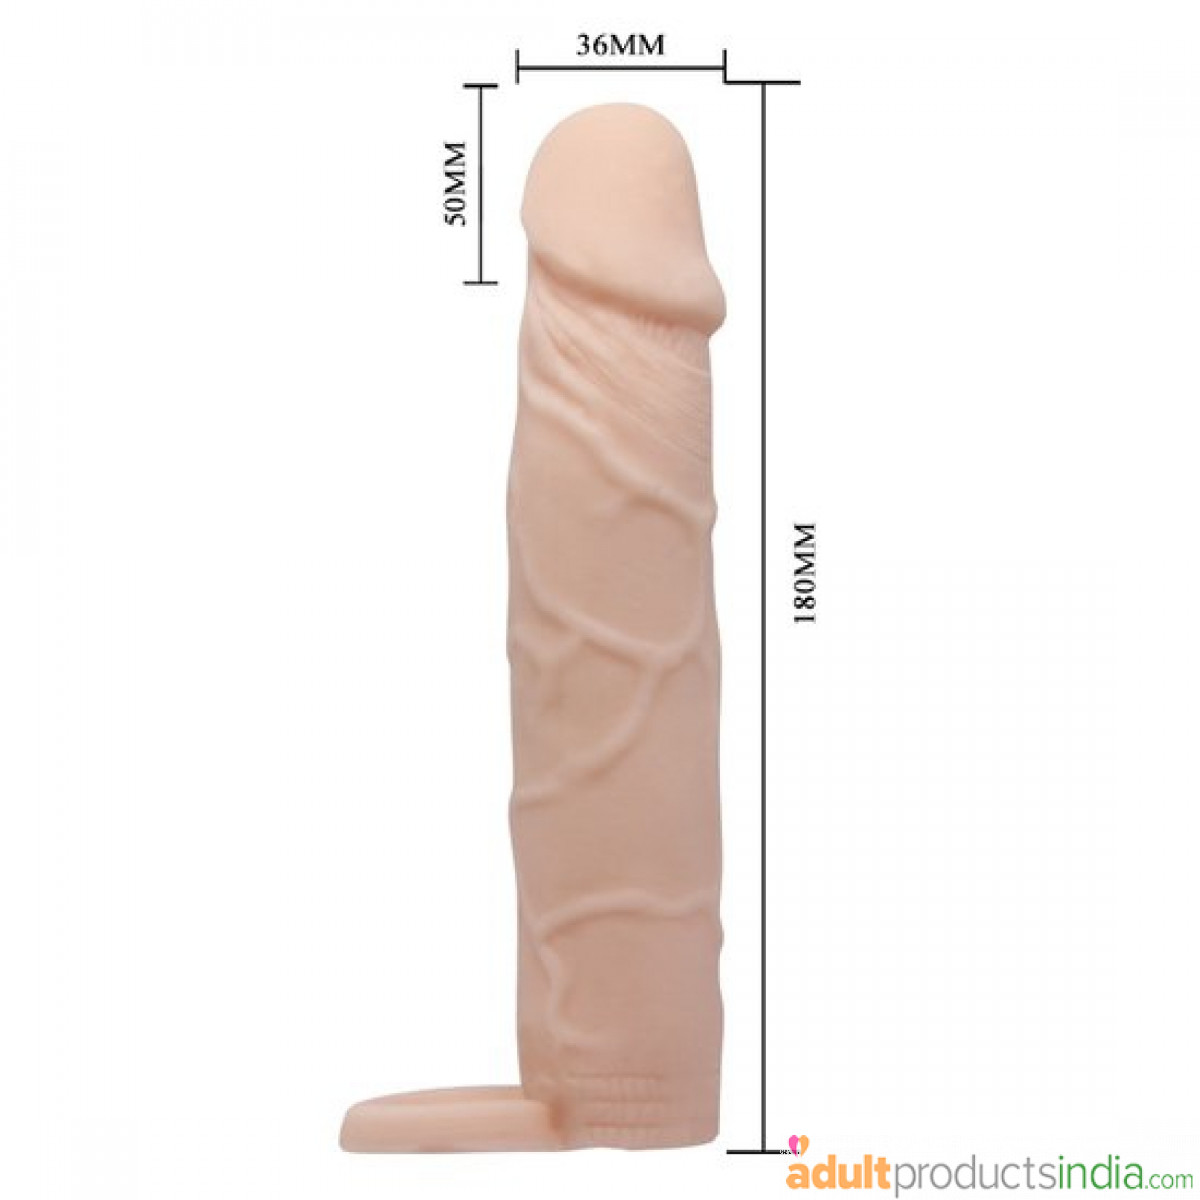 Pretty Love Penis Sleeve 7 inch Adult Products India pic